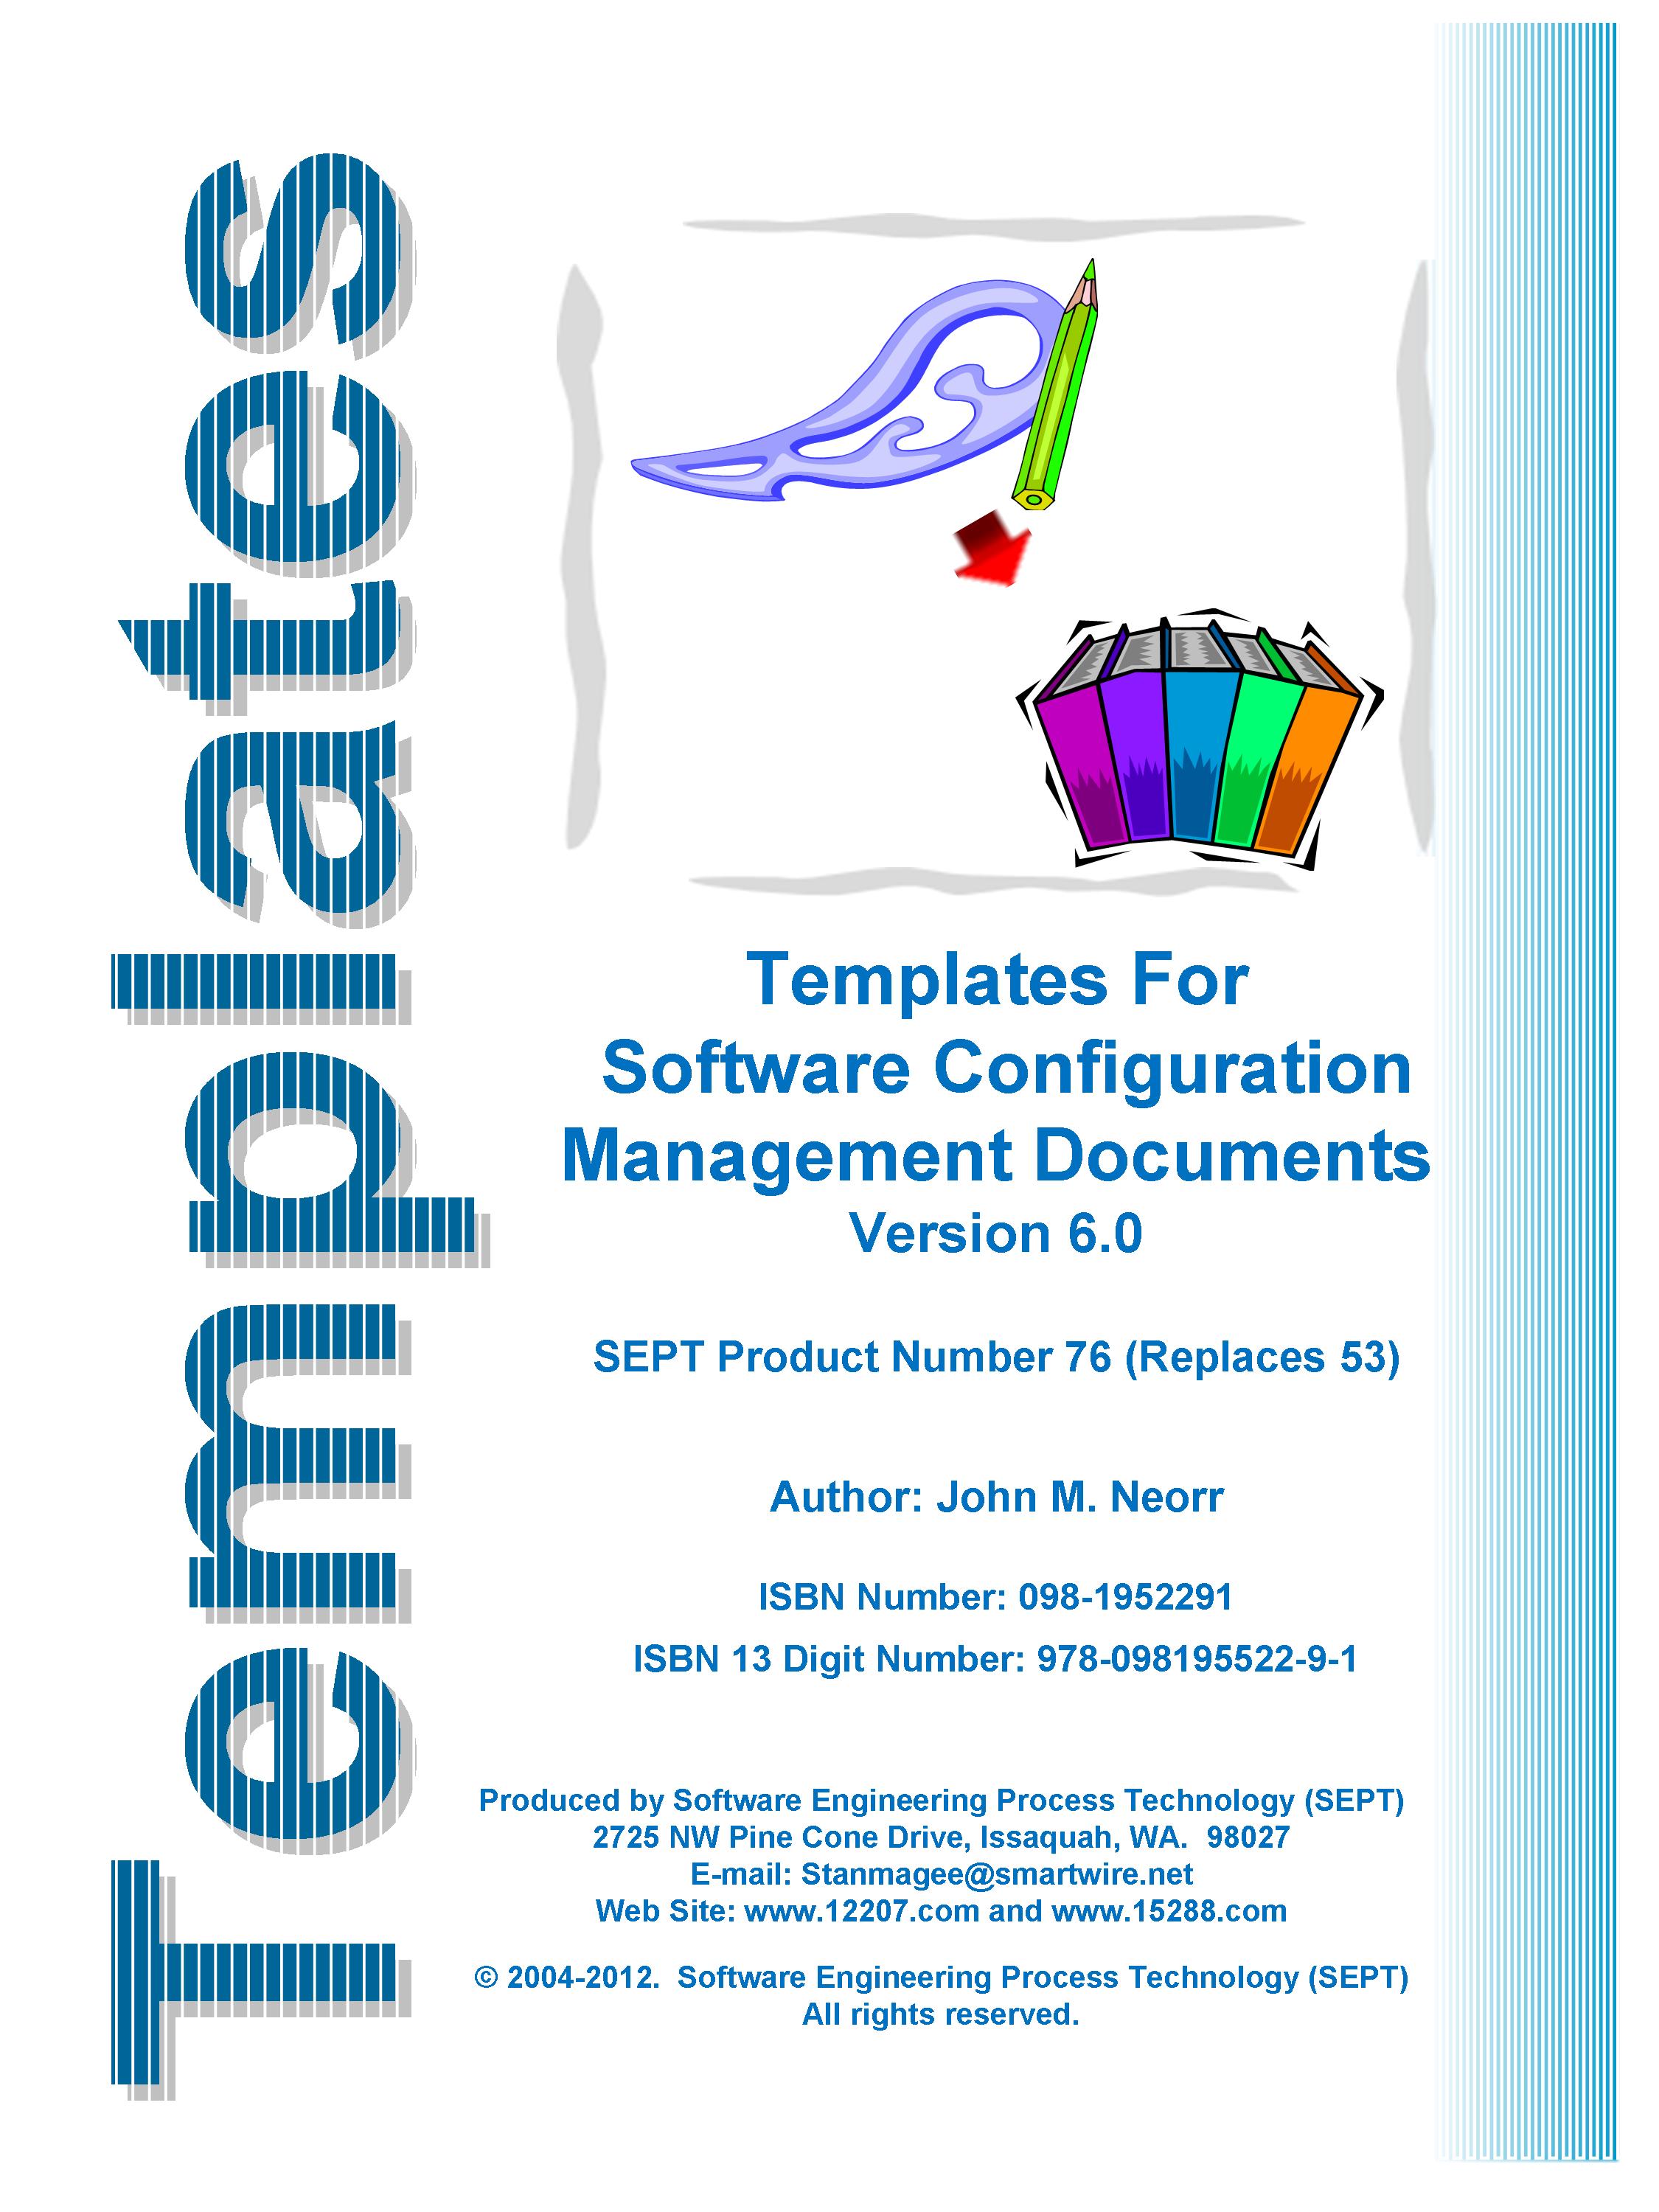 Templates and Plans for Software Configuration Management Documents-Version 6.0